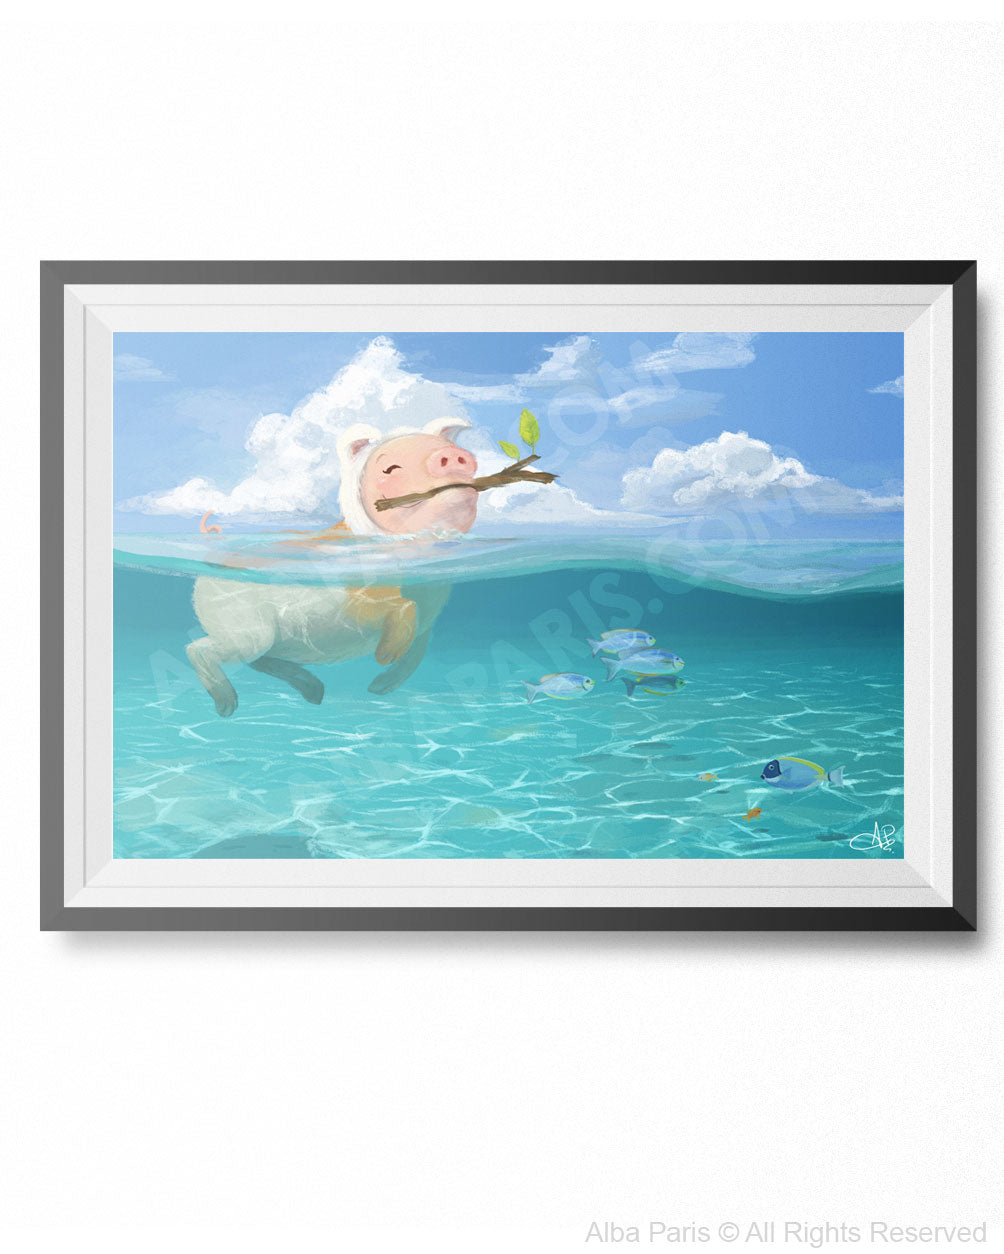 "I Wish I Was a Dog, So They Could Swim And Play" Art Print